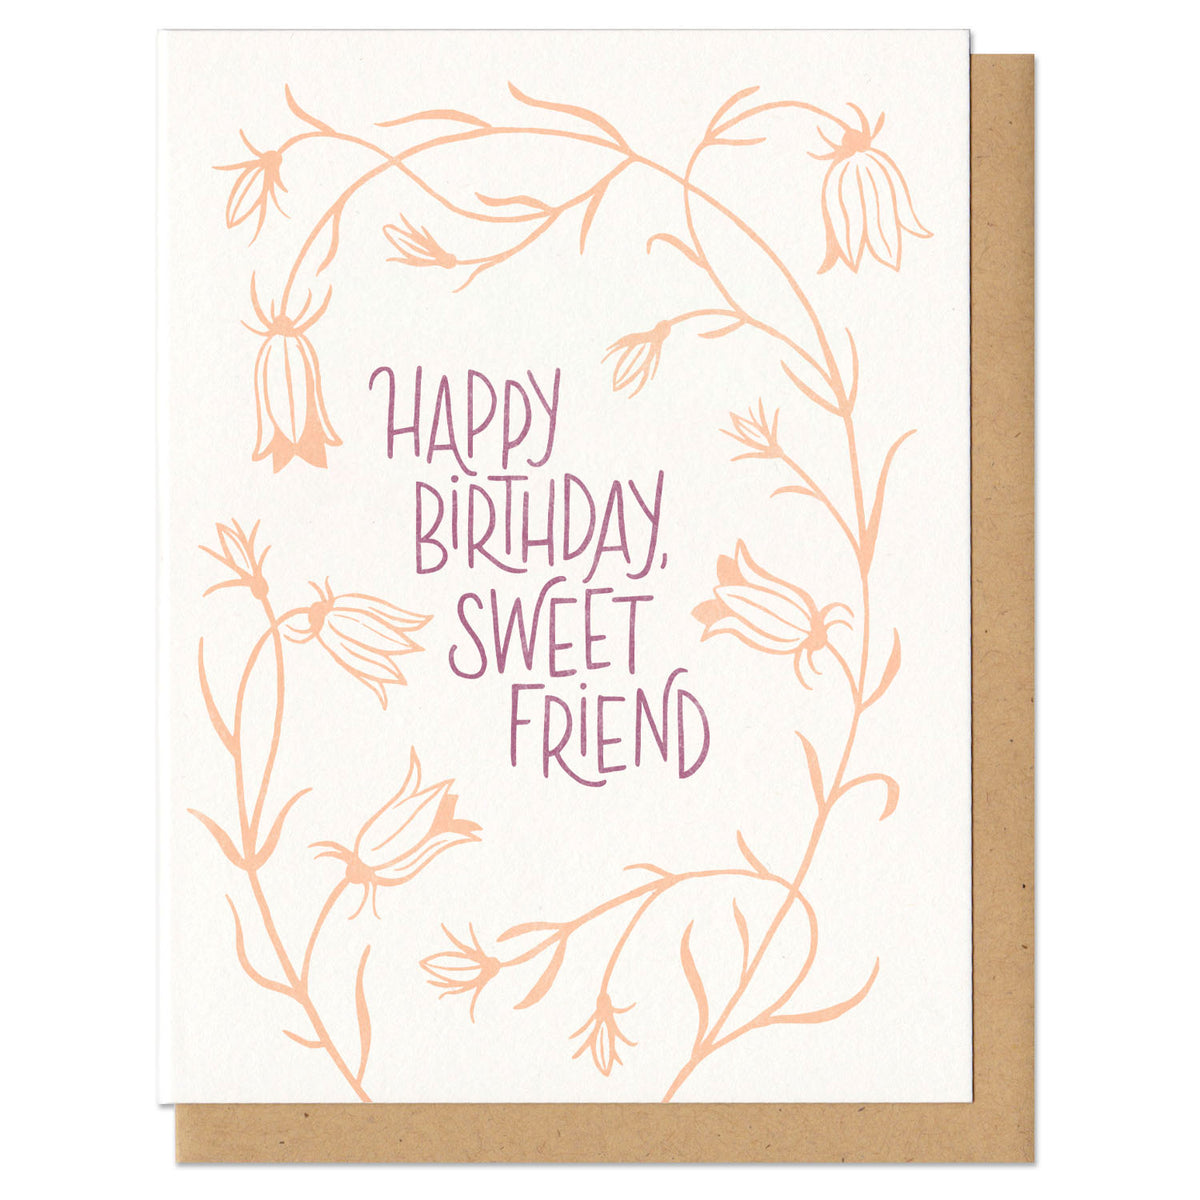 Happy Birthday, Sweet Friend! Greeting Card – Frog & Toad Press